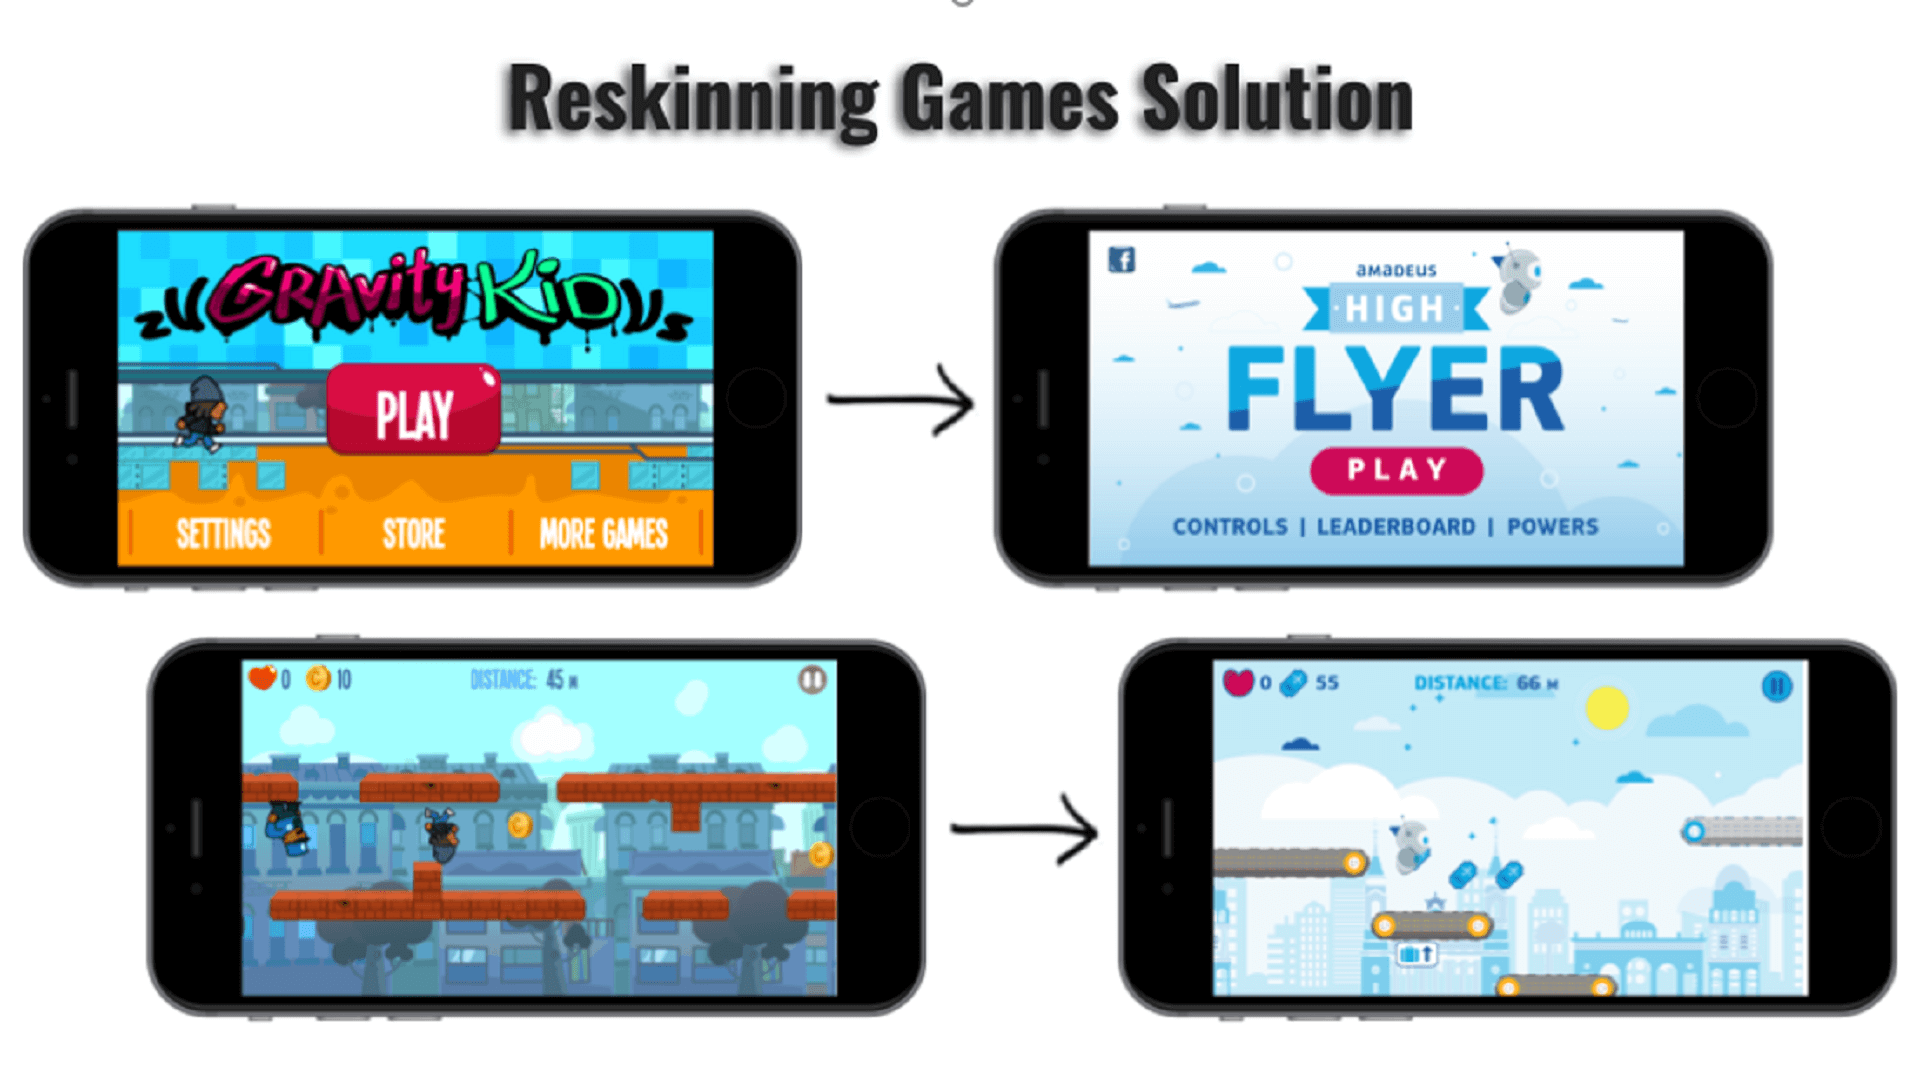 HTML5 Games For Human Resource Management (HRM)